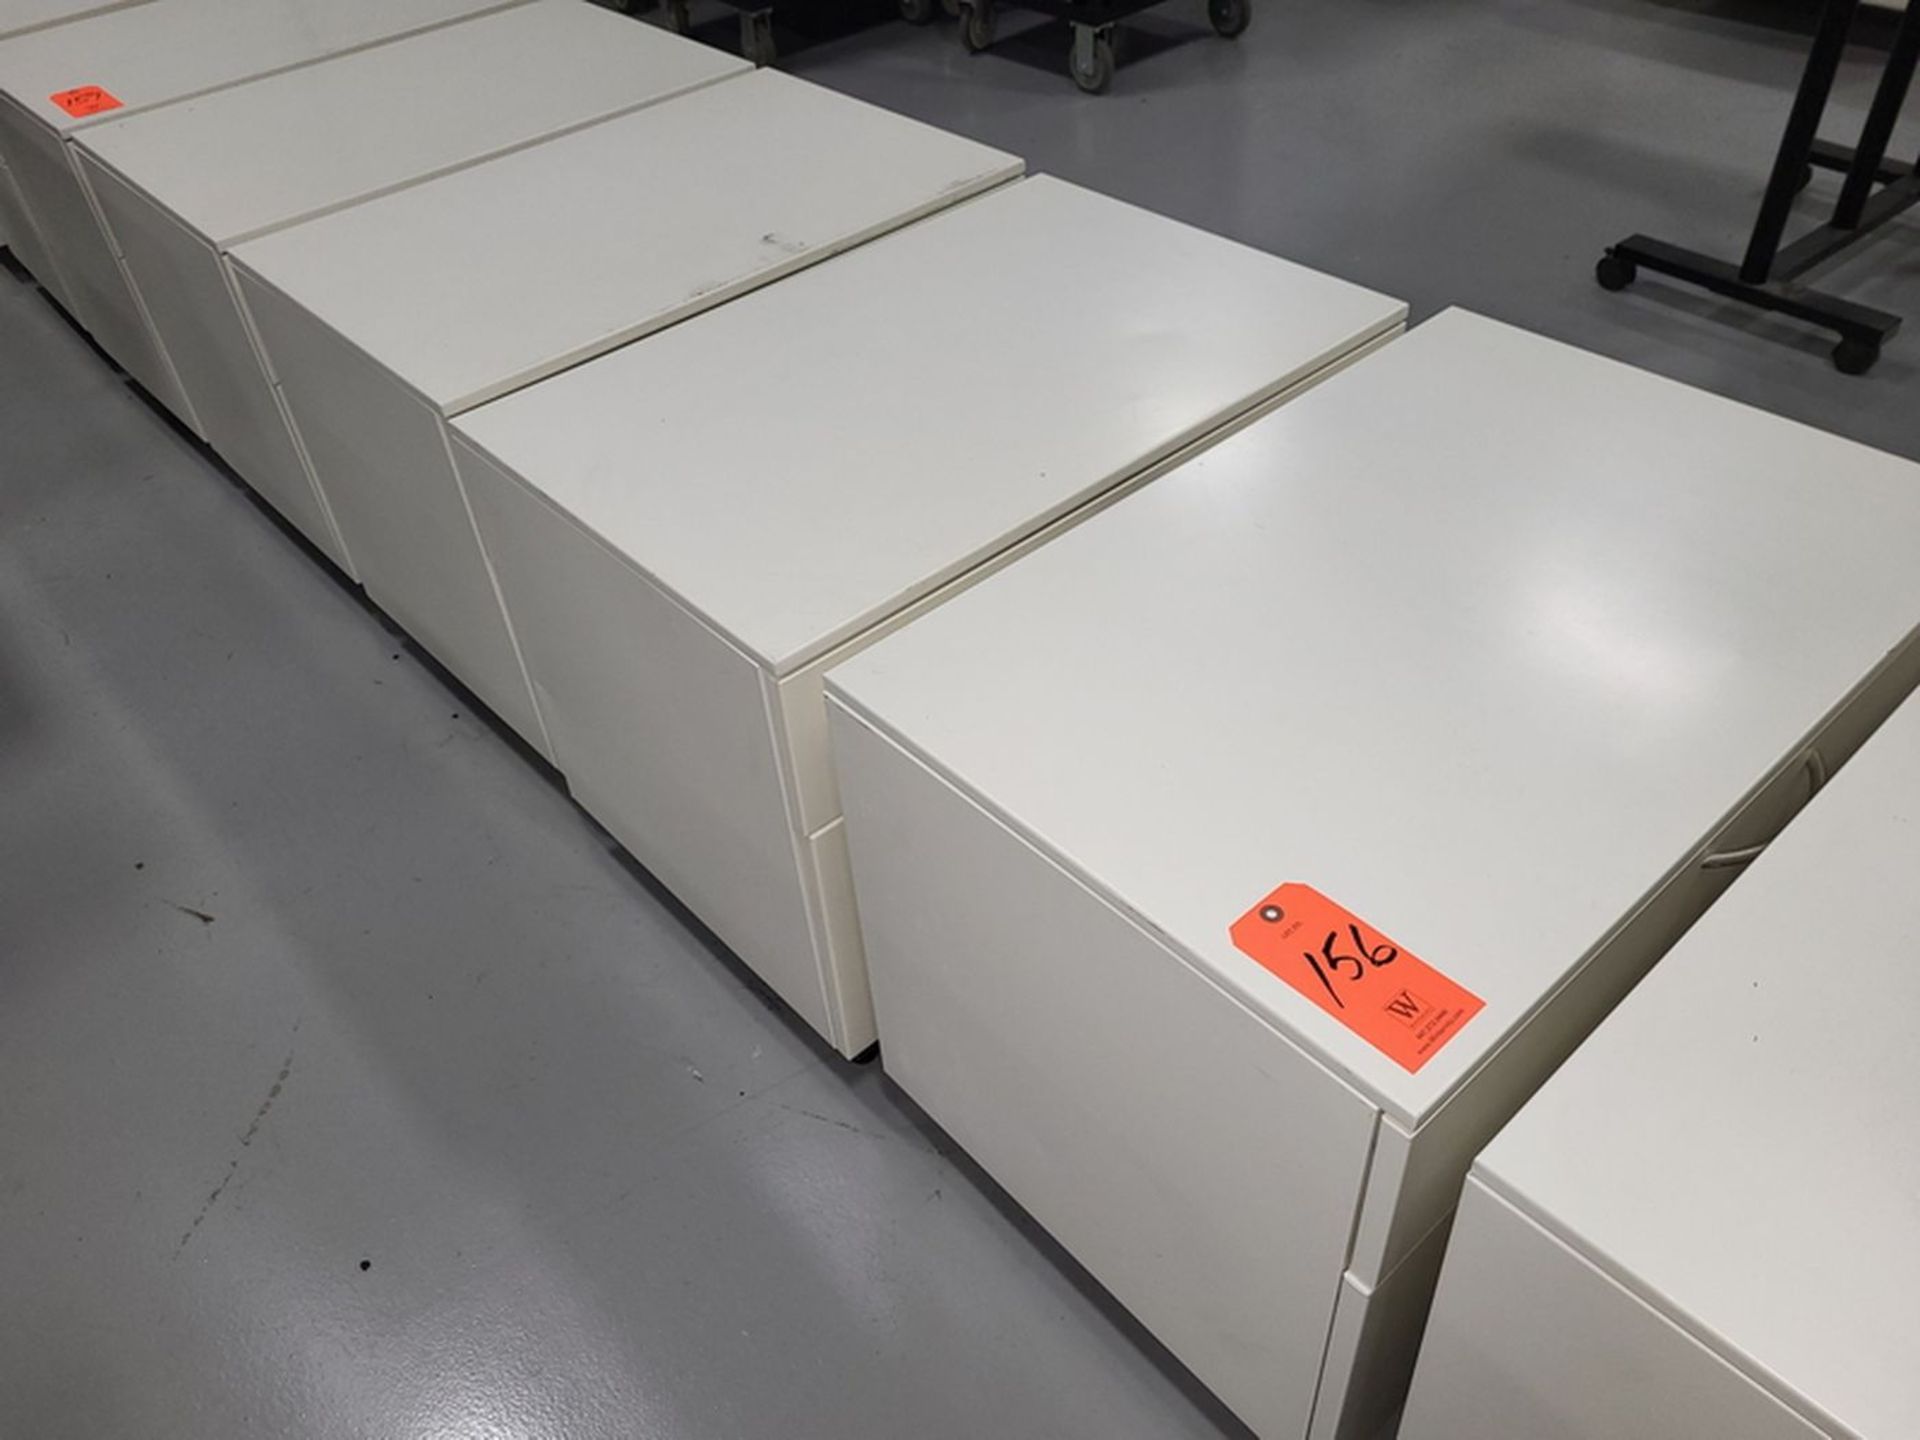 Lot - (4) Rolling 2-Drawer Cabinets; 30 in. x 20 in. x 22.5 in. high